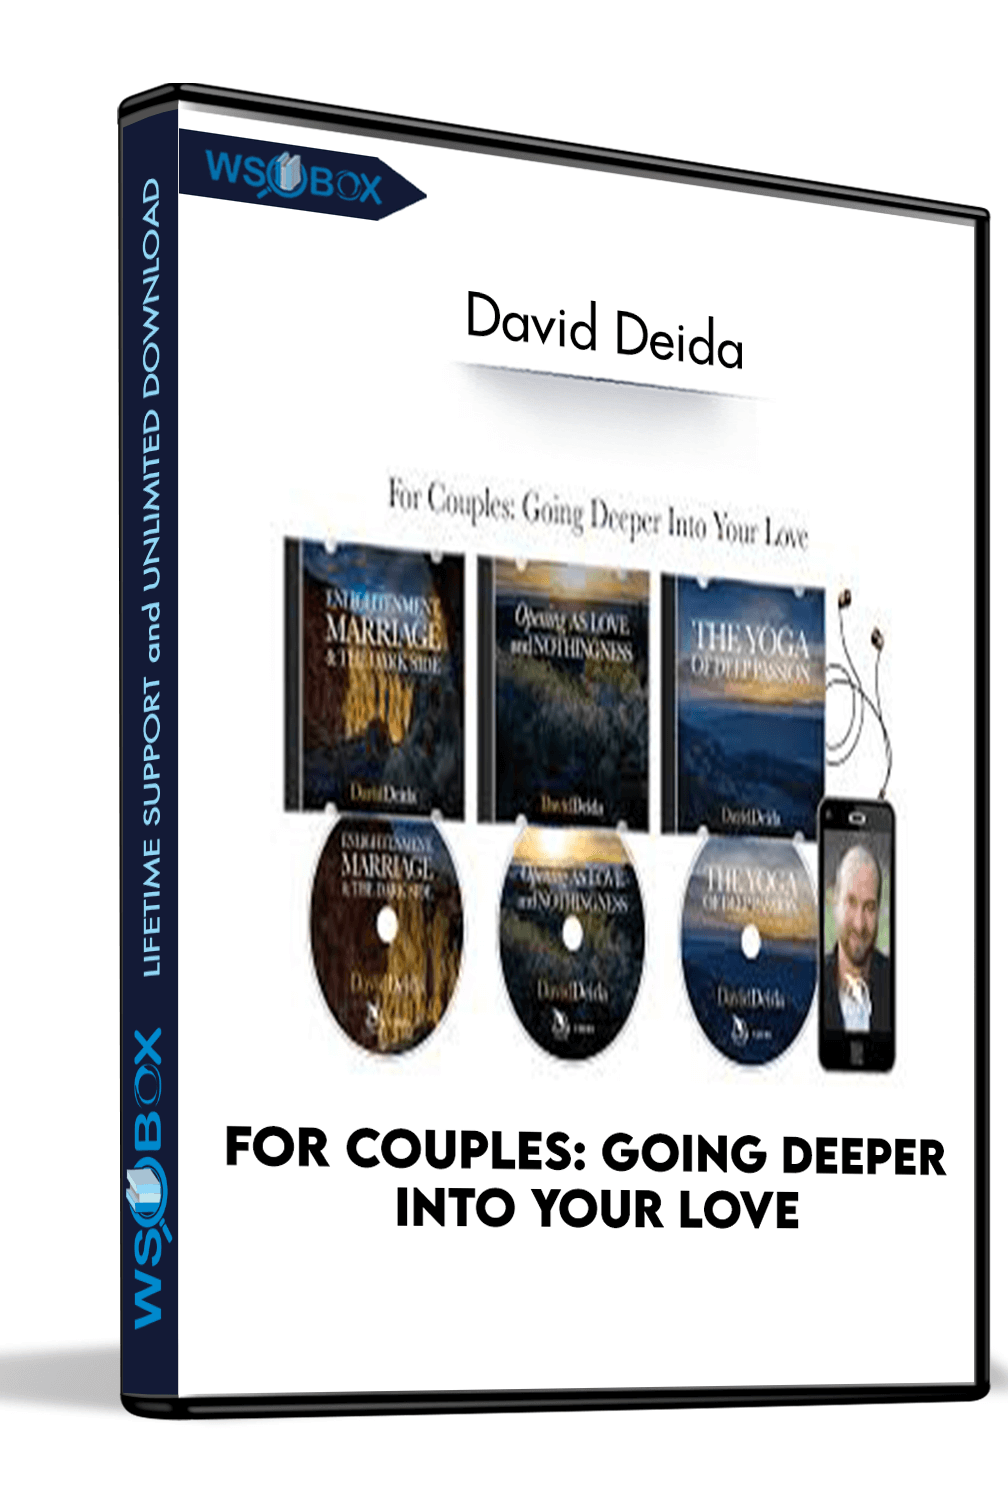 for-couples-going-deeper-into-your-love-david-deida